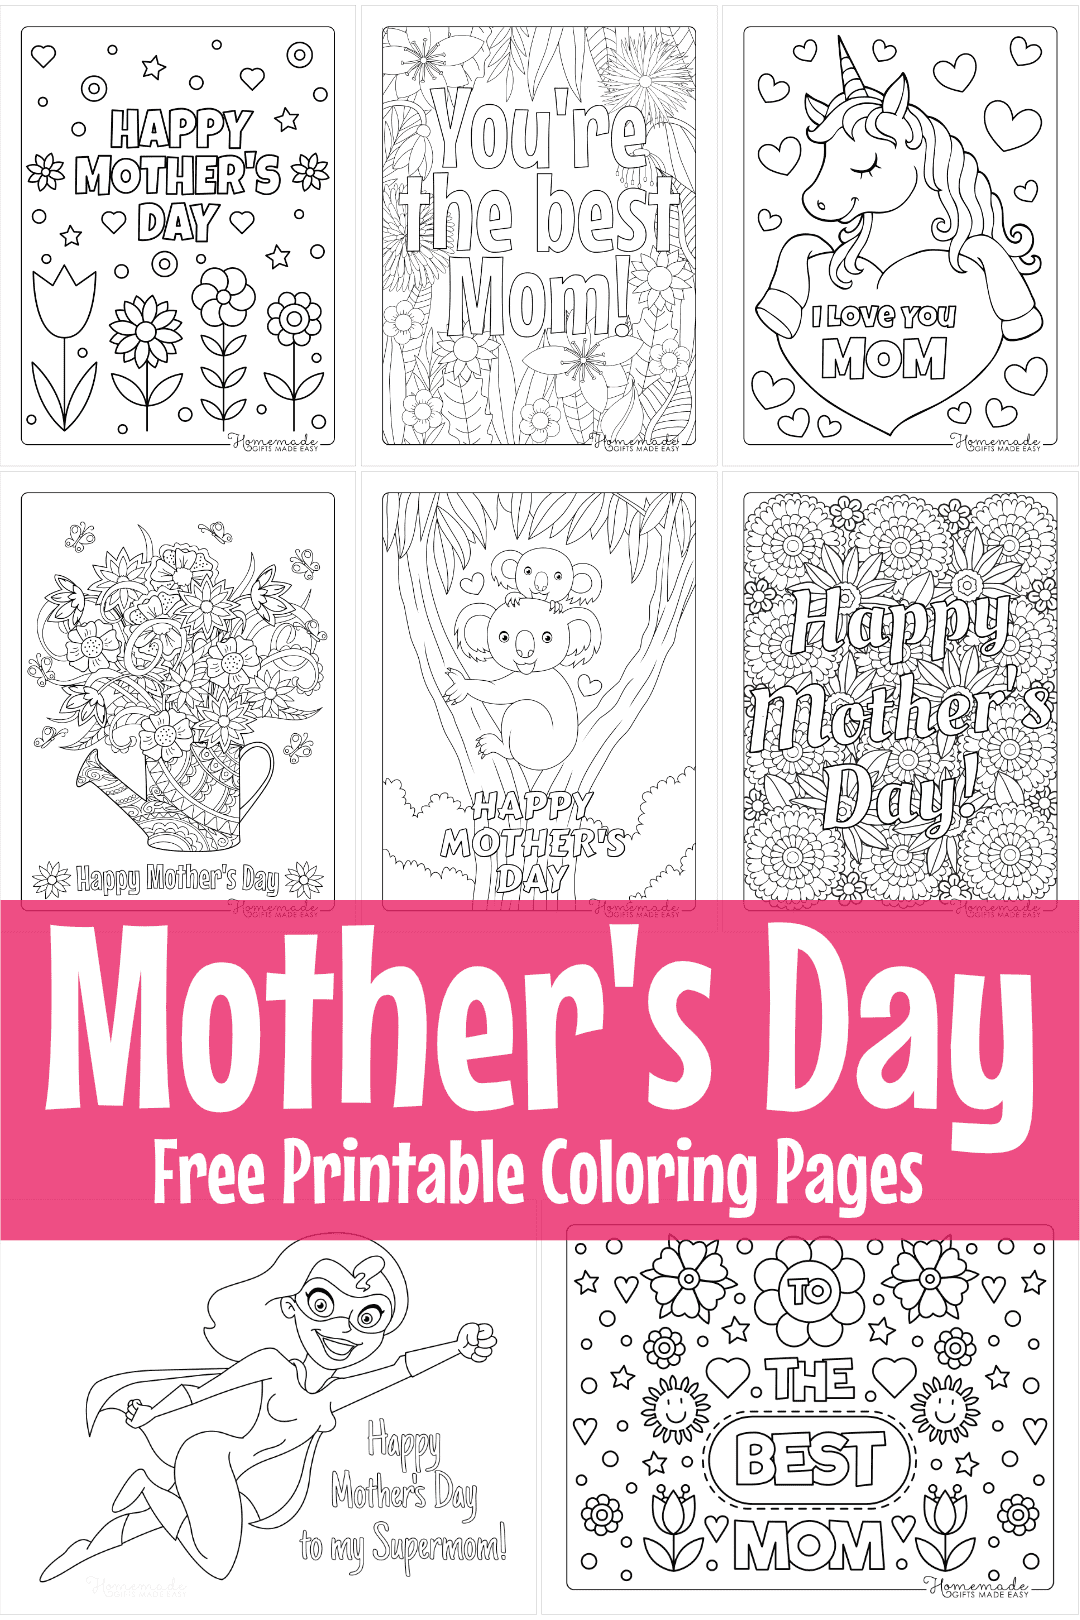 free printable mother's day coloring pages